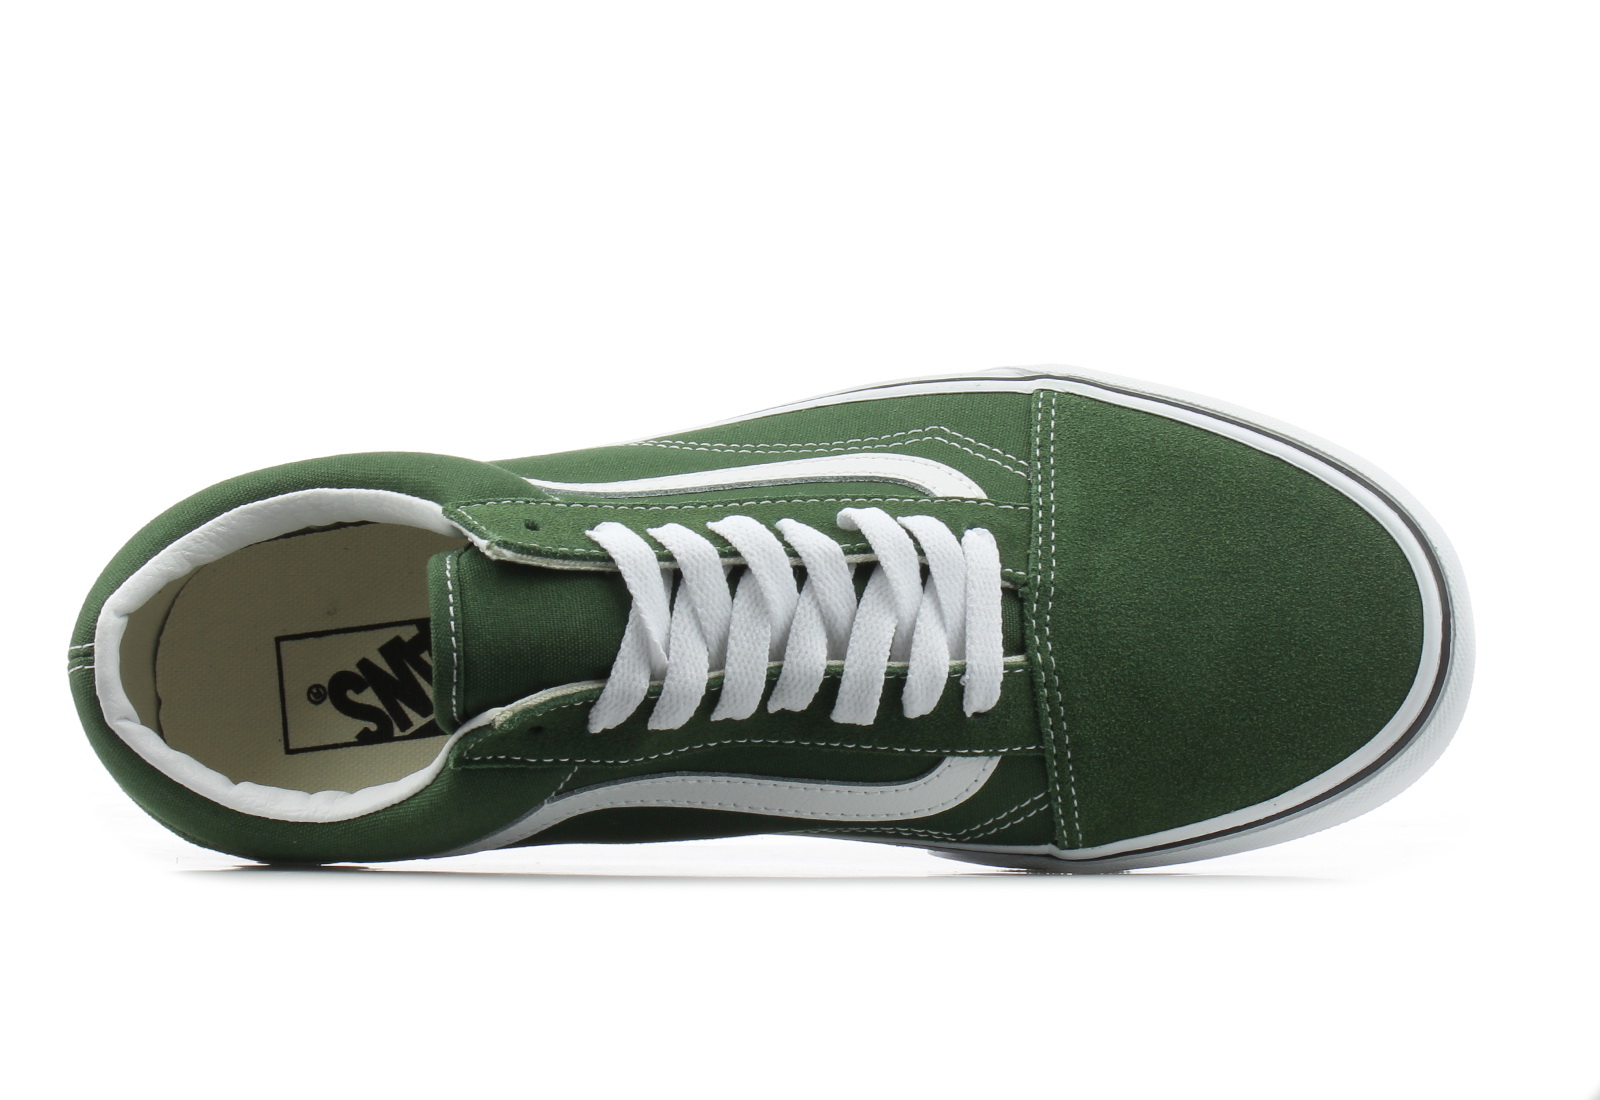 Vans Trainers - Skool - - Online shop shoes and boots